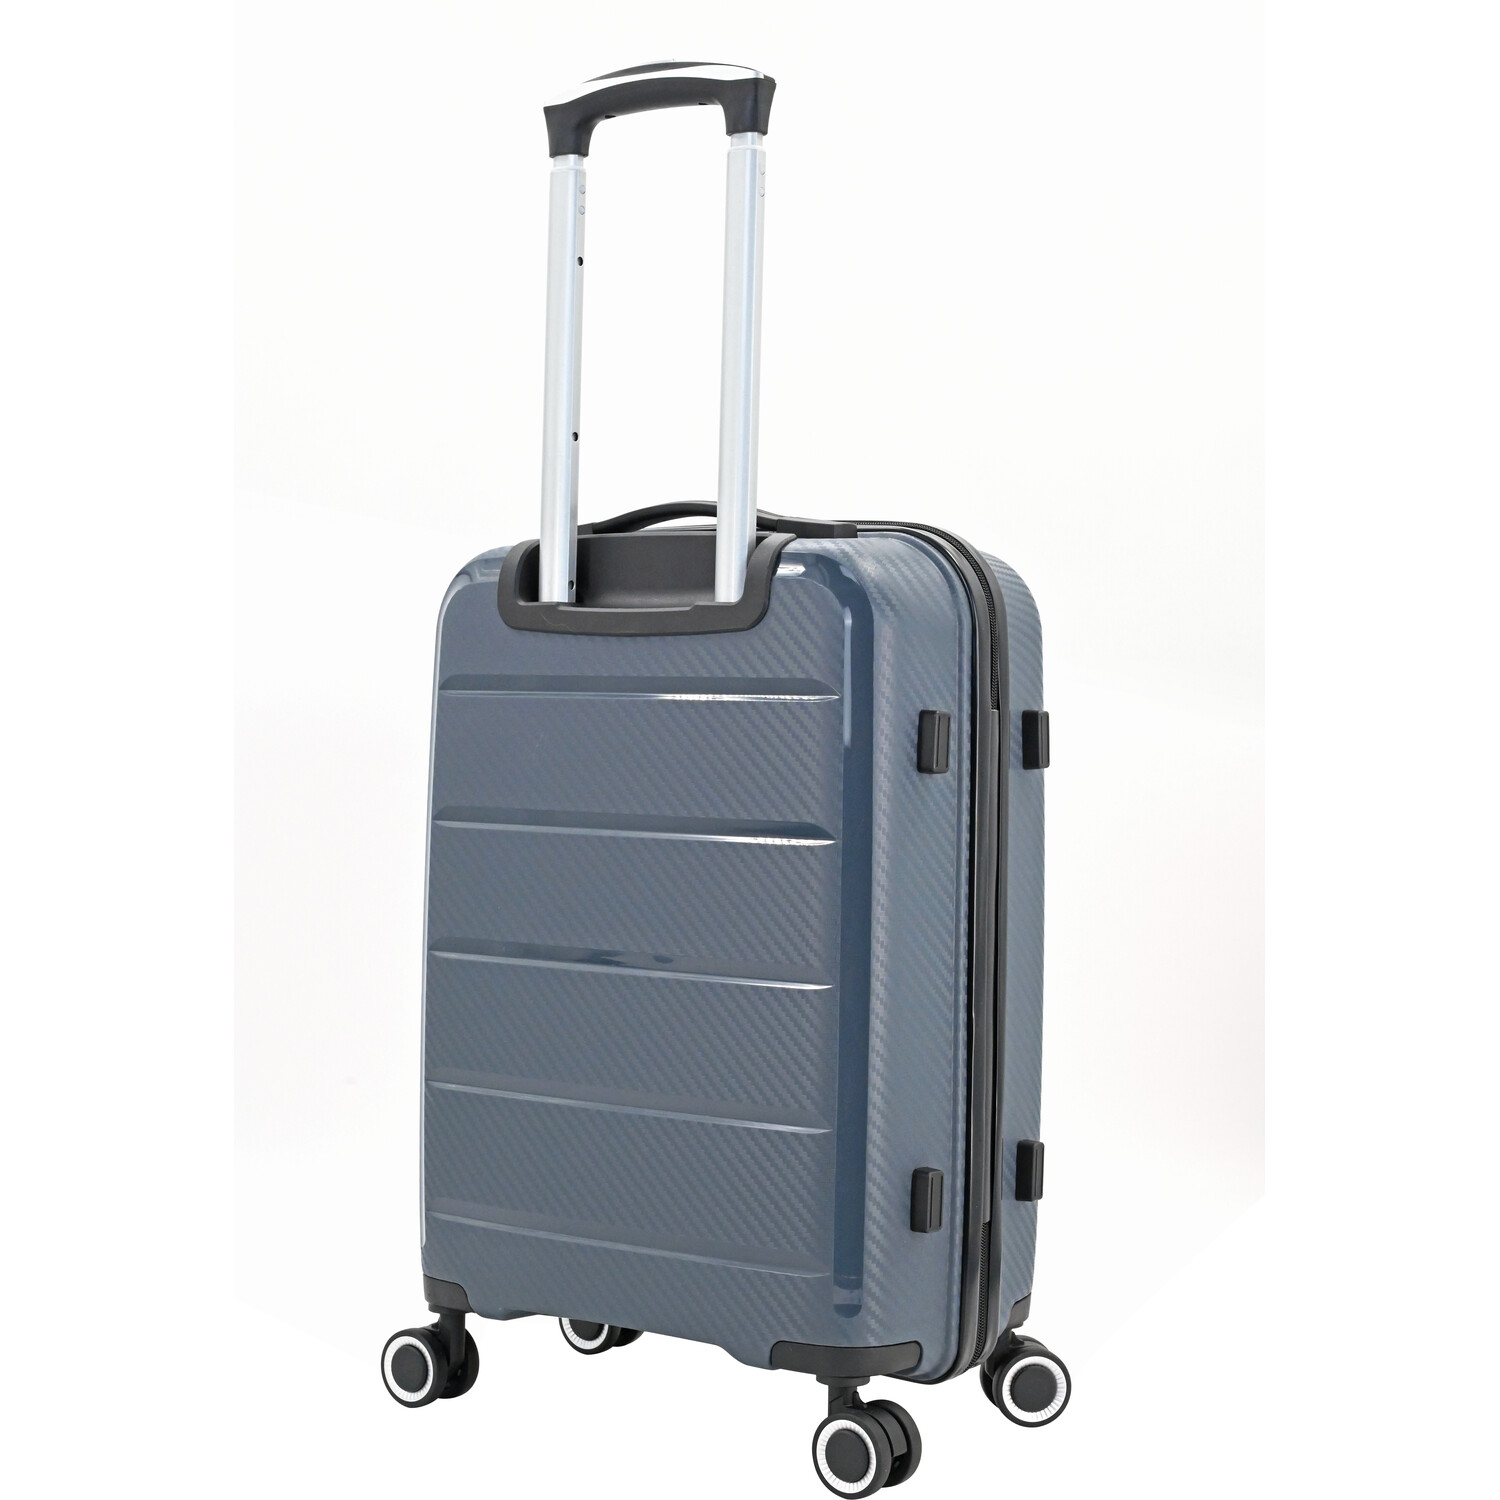 Swift Discovery Luggage Case - Grey / Cabin Case Image 3